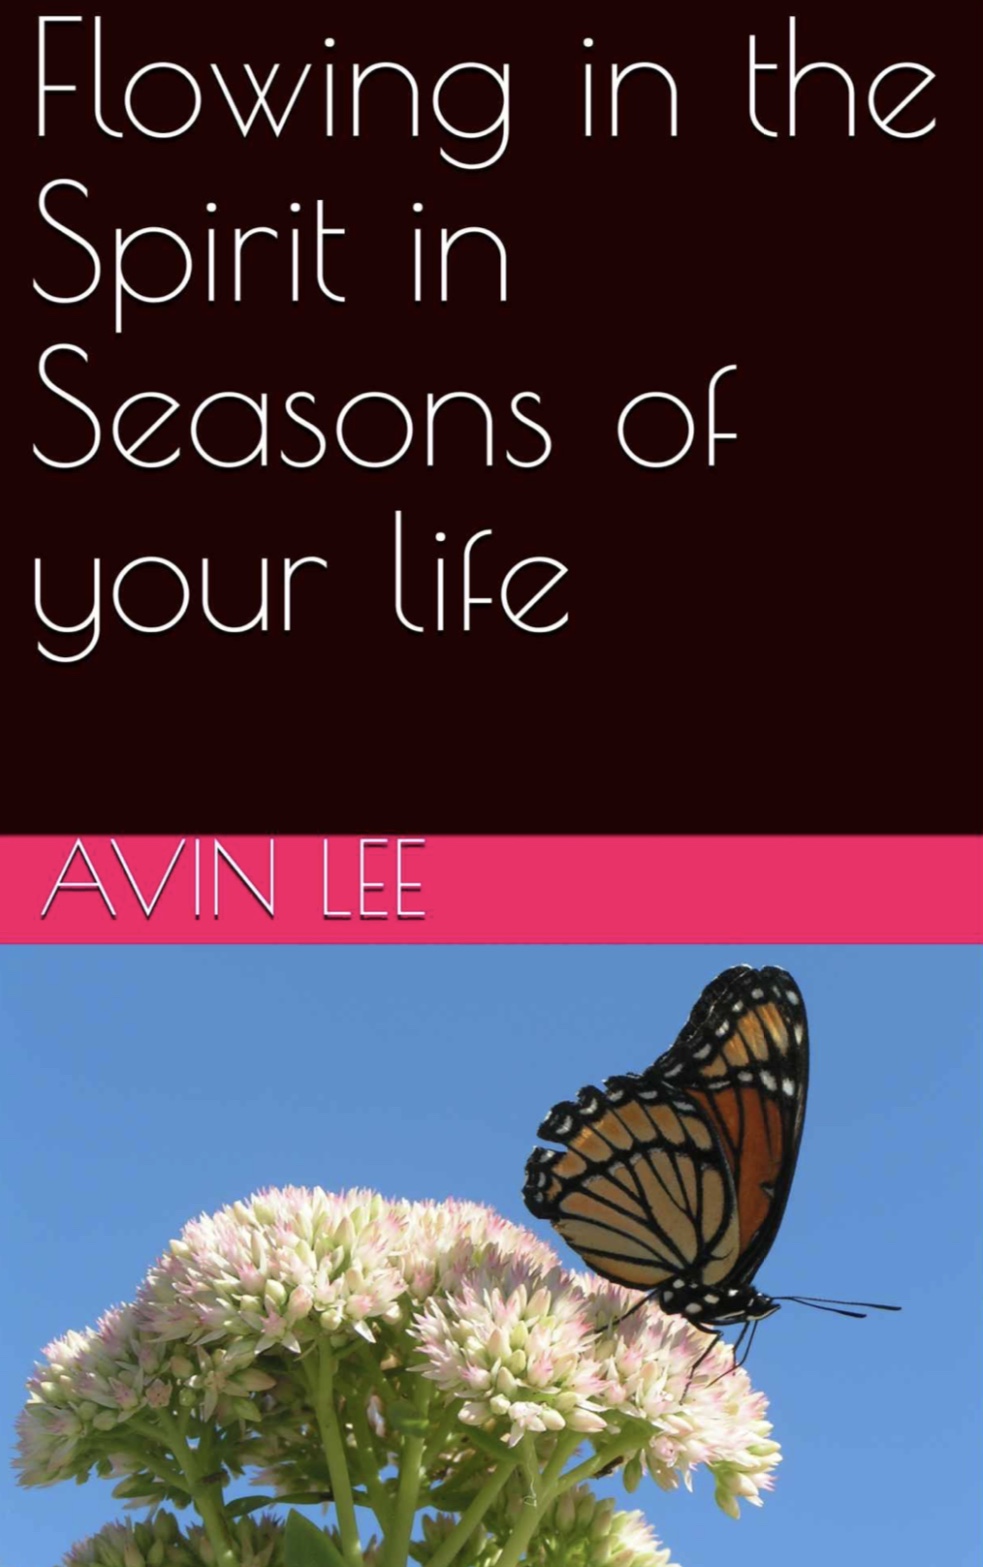 Flowing in the Spirit in seasons of your life